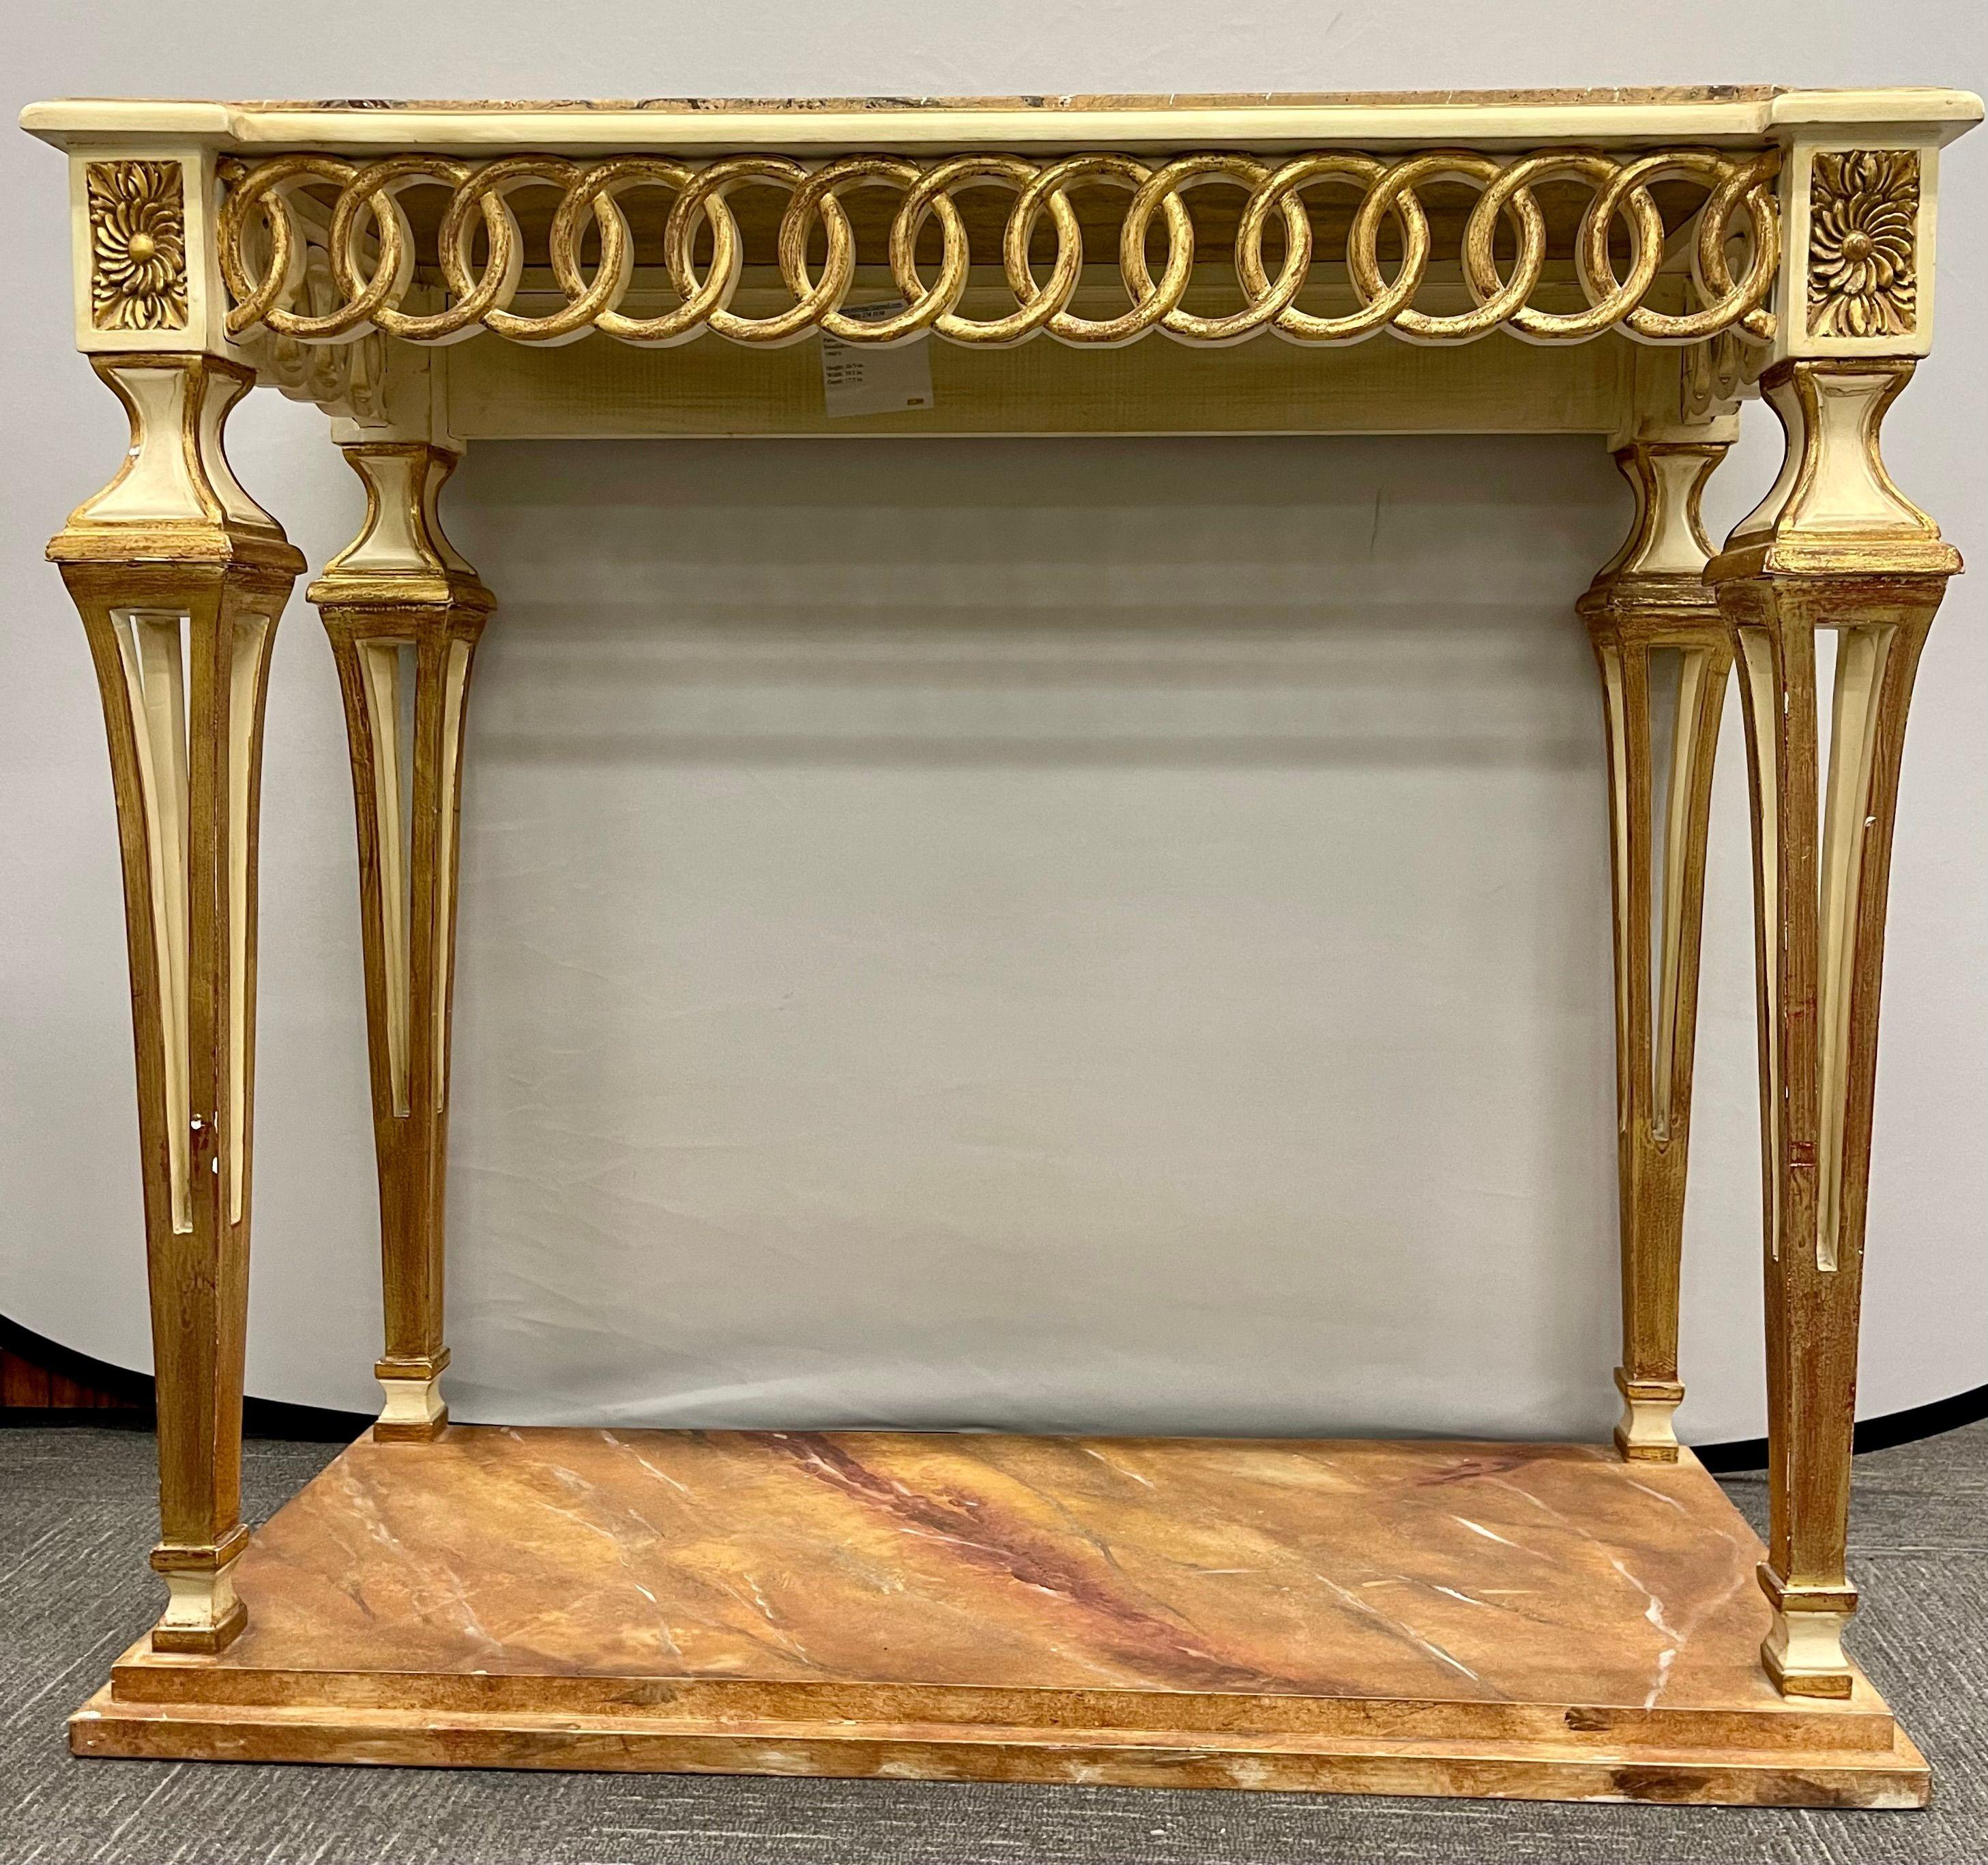 Stunning pair of parcel paint and gilt decorated Swedish serving or console tables each having a grained marble top. The faux marble base leading to a set of paint and gilt decorated pierced open carved legs terminating in carved rosette gilt